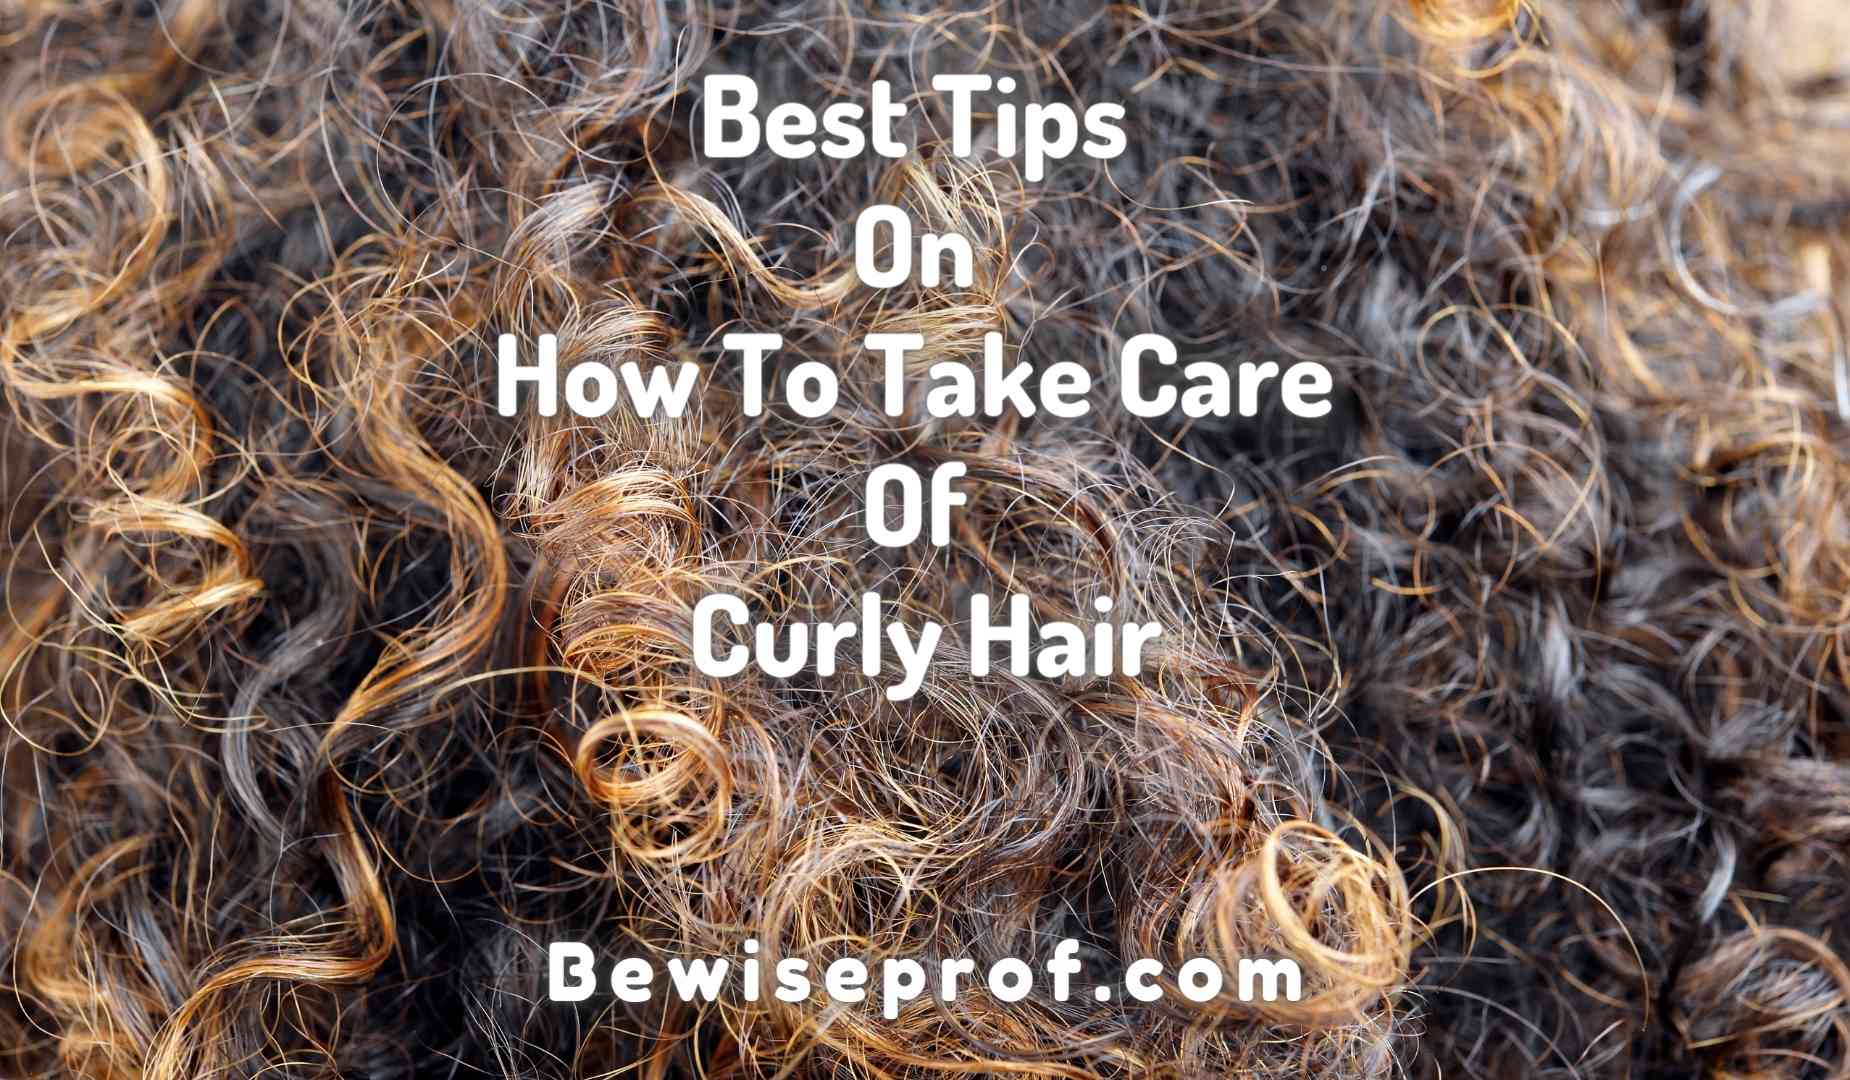 Best Tips On How To Take Care Of Curly Hair